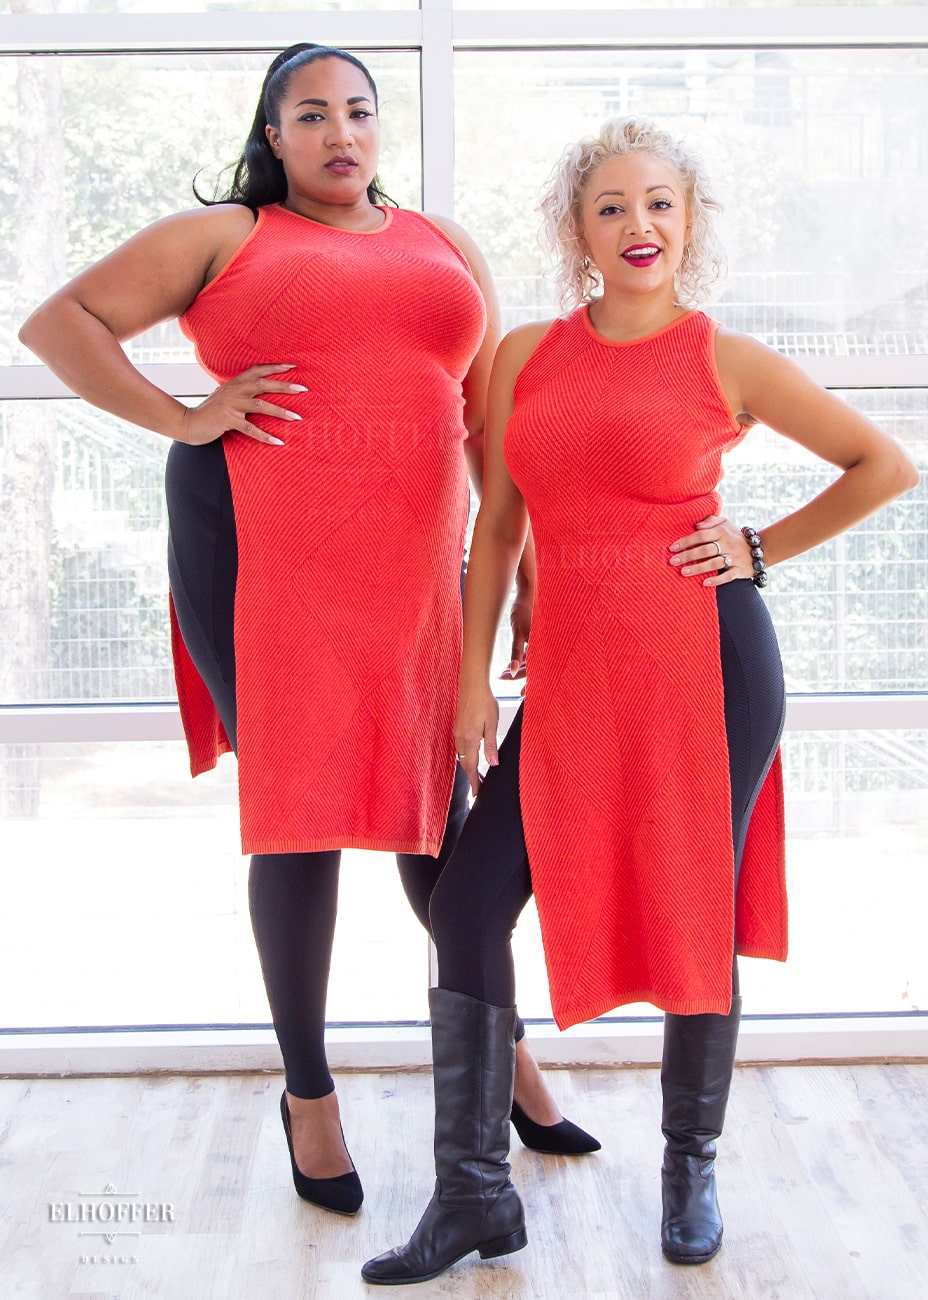 Tas, a medium dark skinned 2XL model with long black hair, and Simone, an olive skinned size small model with short curly platinum hair, are both wearing the orange tabard.